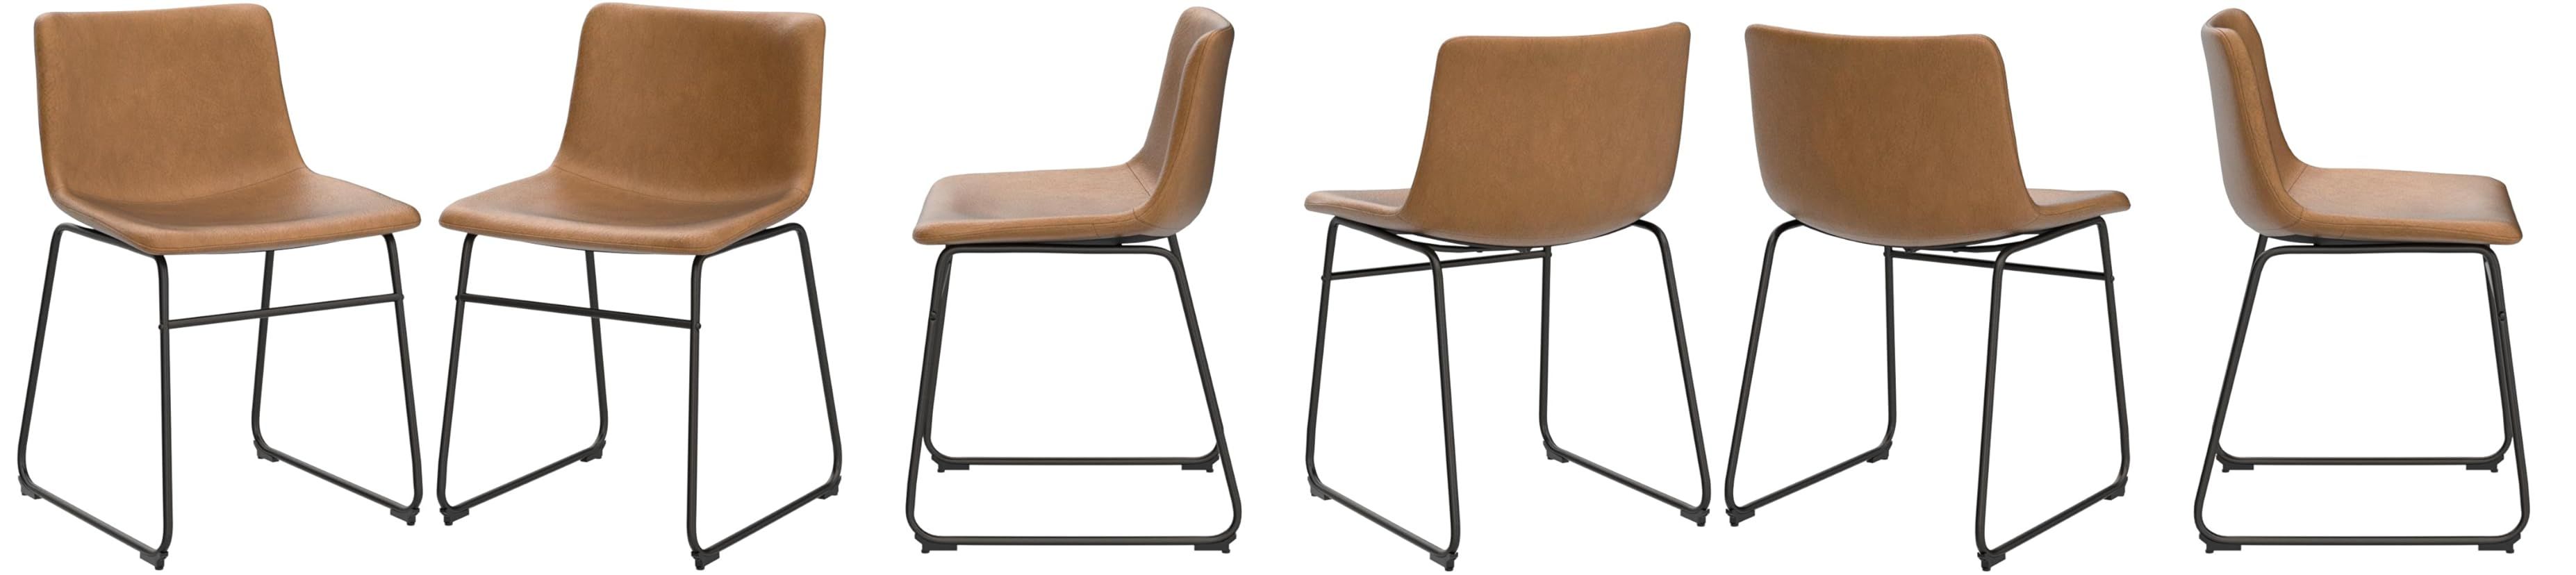 Amazon.com: Waleaf Dining Chairs,Faux Leather Dining Chairs Set of 2,18 Inch Kitchen Dining Room Chairs with Backrest and Metal Leg,Mid Century Modern Armless Chair,Upholstered Seat : Home & Kitchen | Amazon (US)